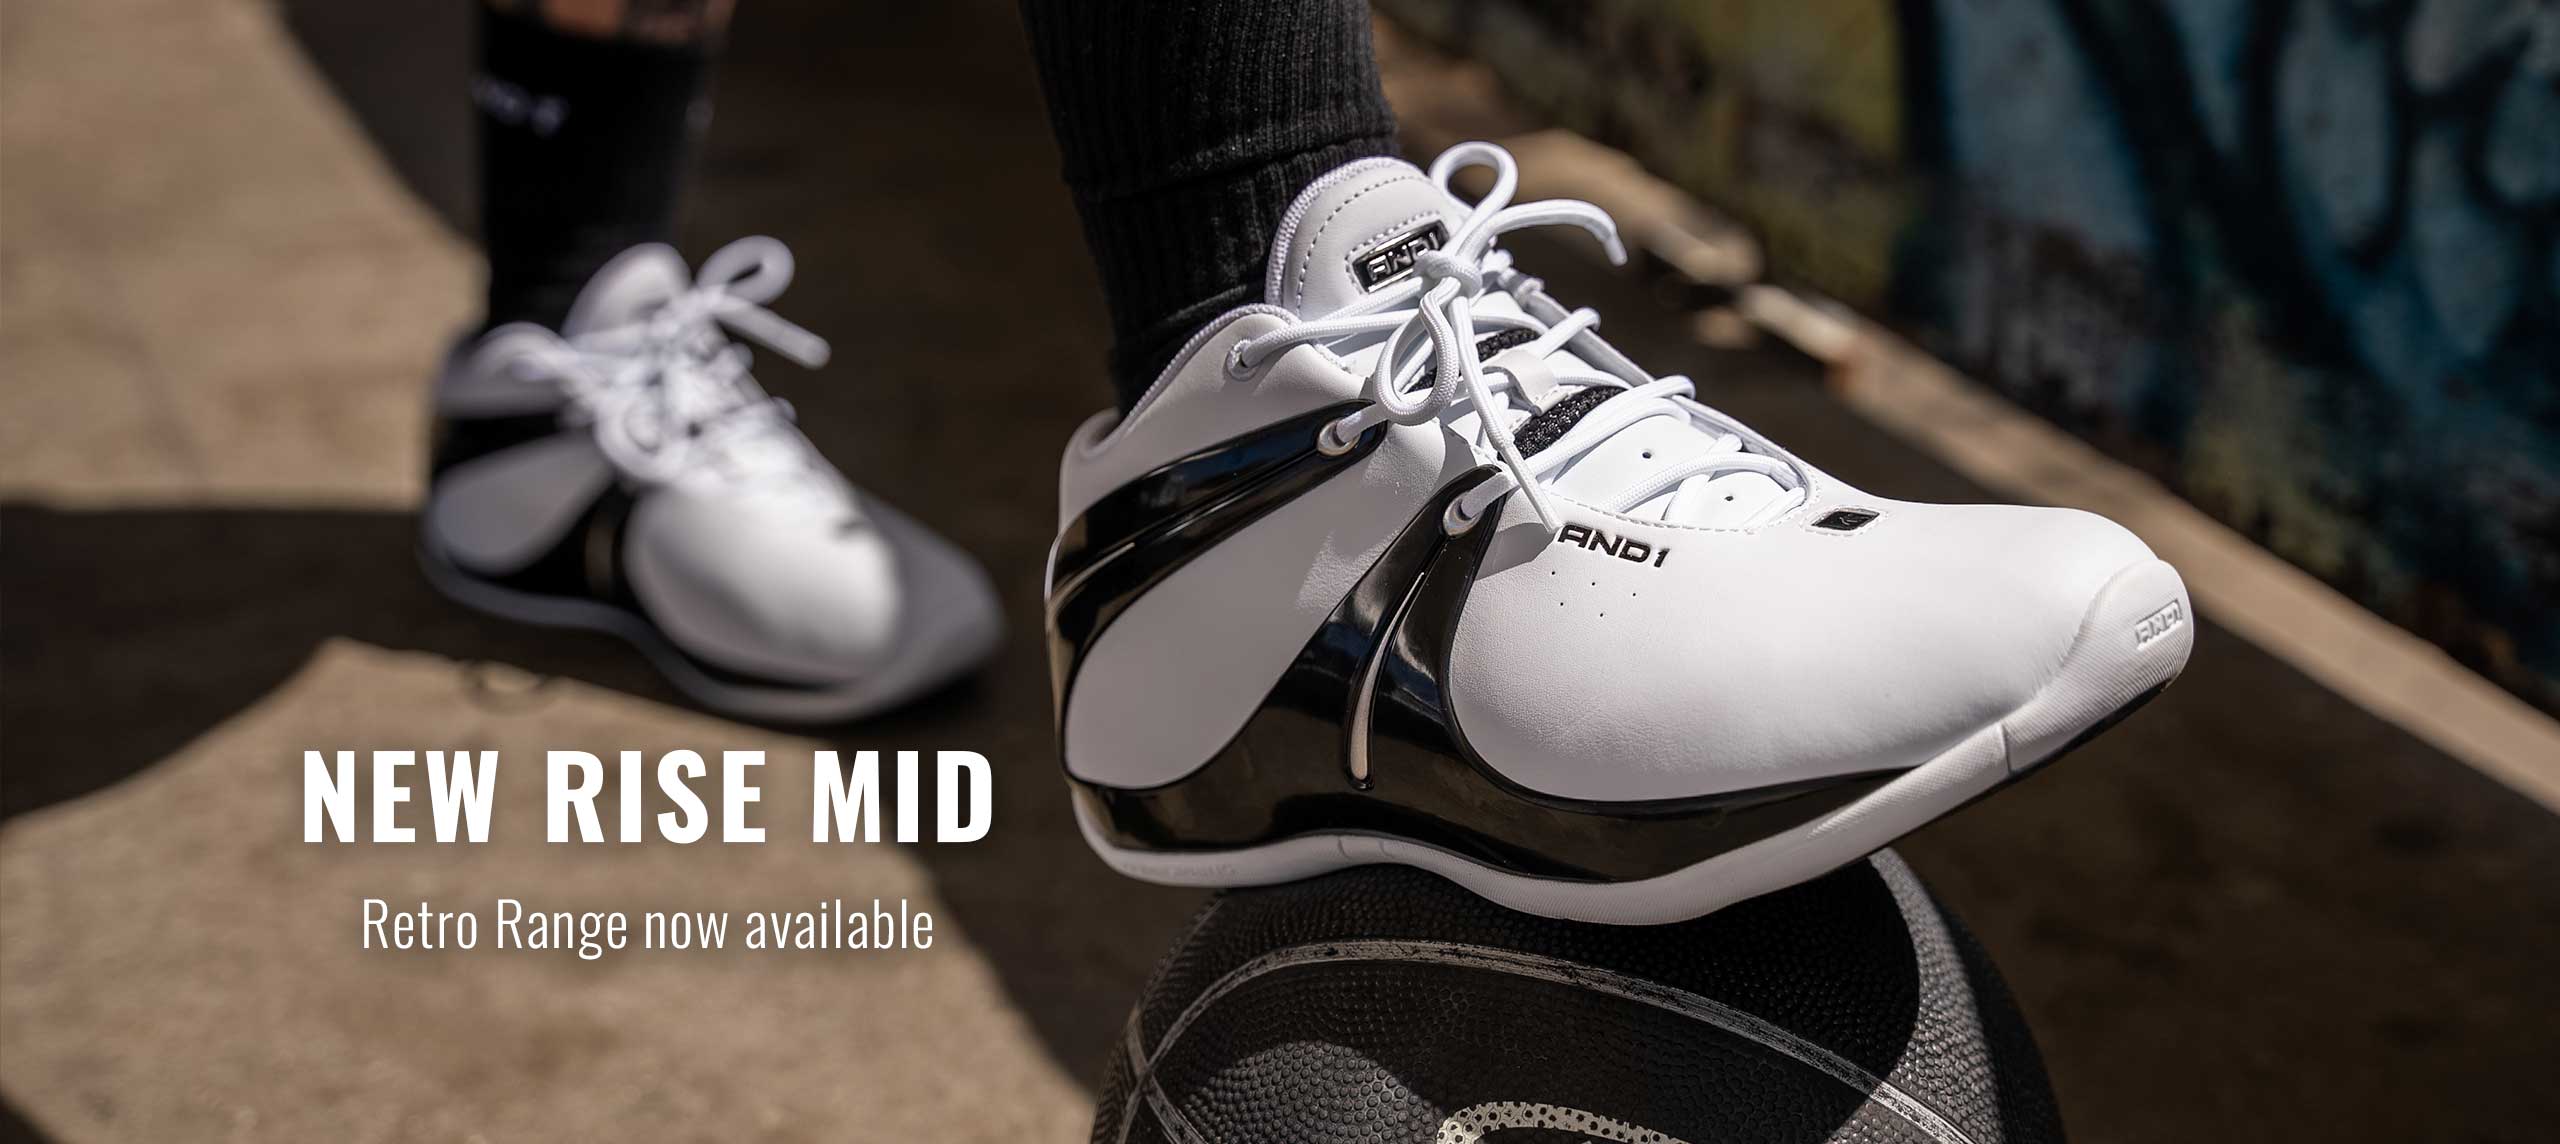 rise mid basketball shoes 2